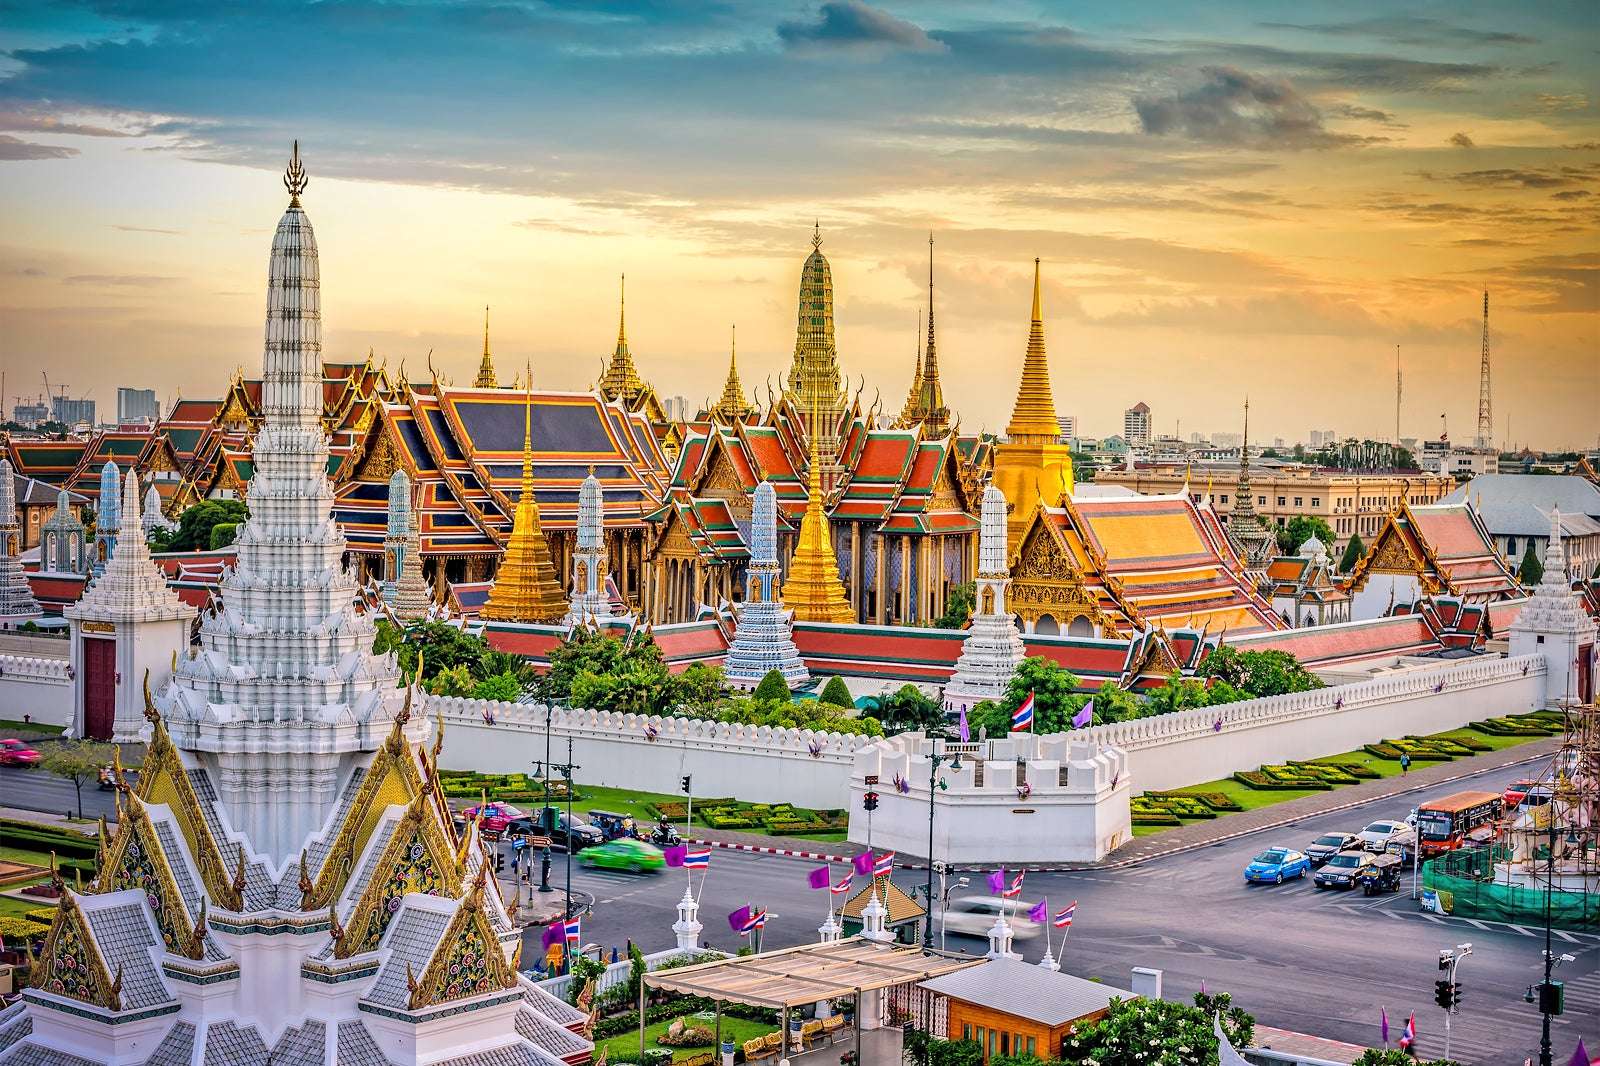 Grand Palace, Thailand puzzle online from photo